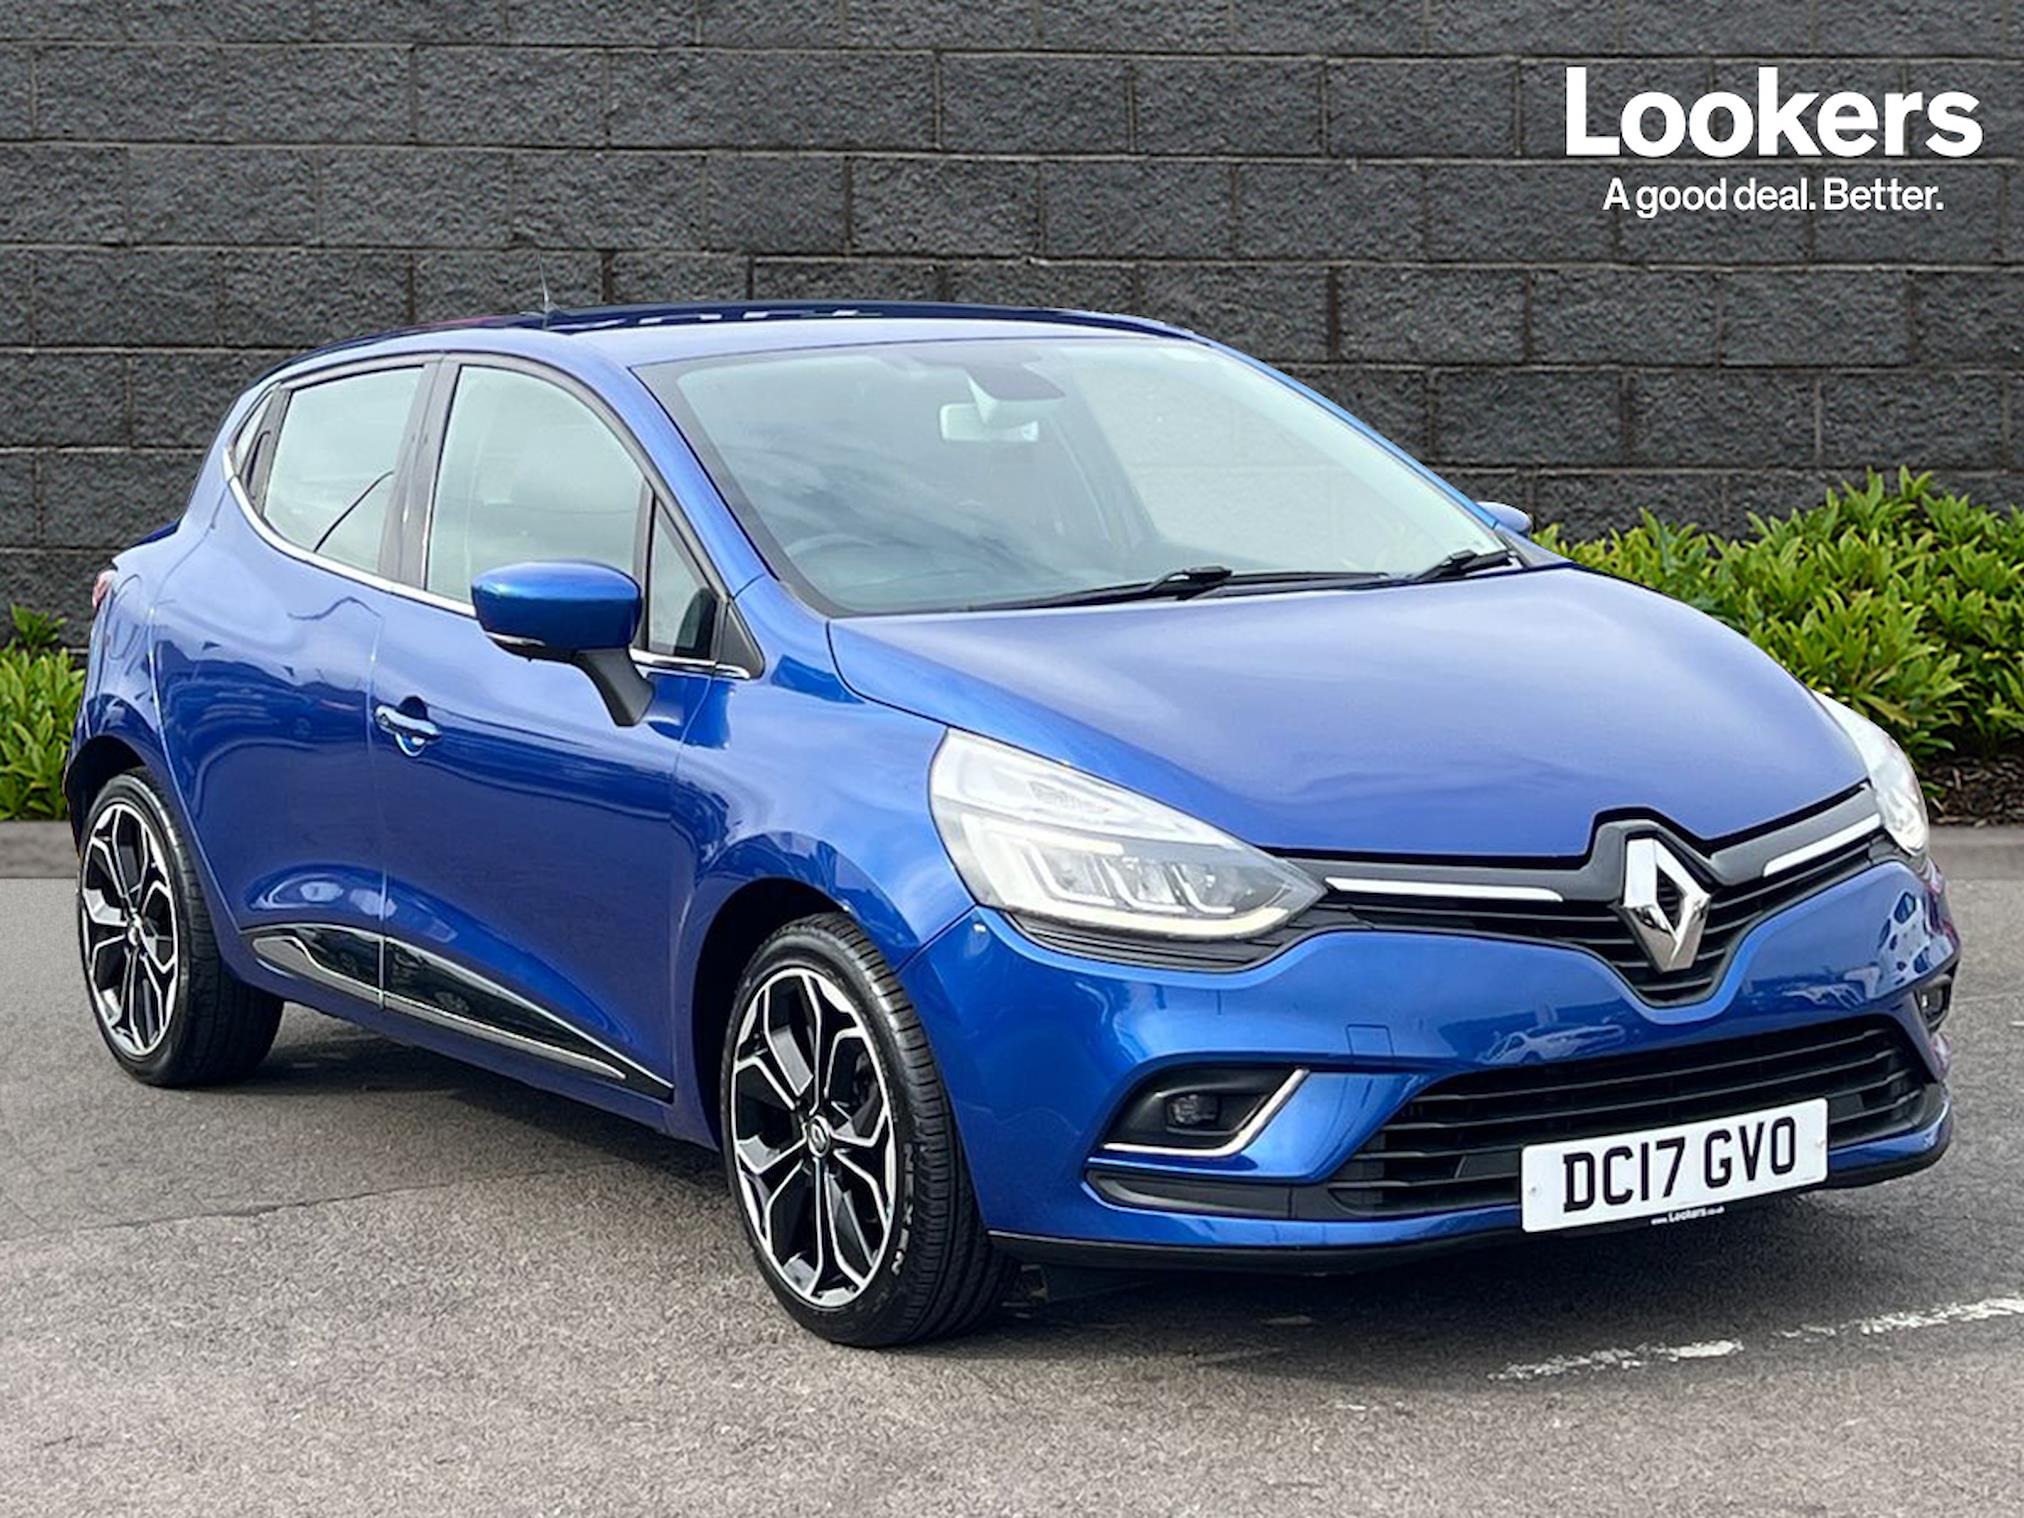 Used RENAULT CLIO 0.9 Tce 90 Dynamique S Nav 5Dr 2017